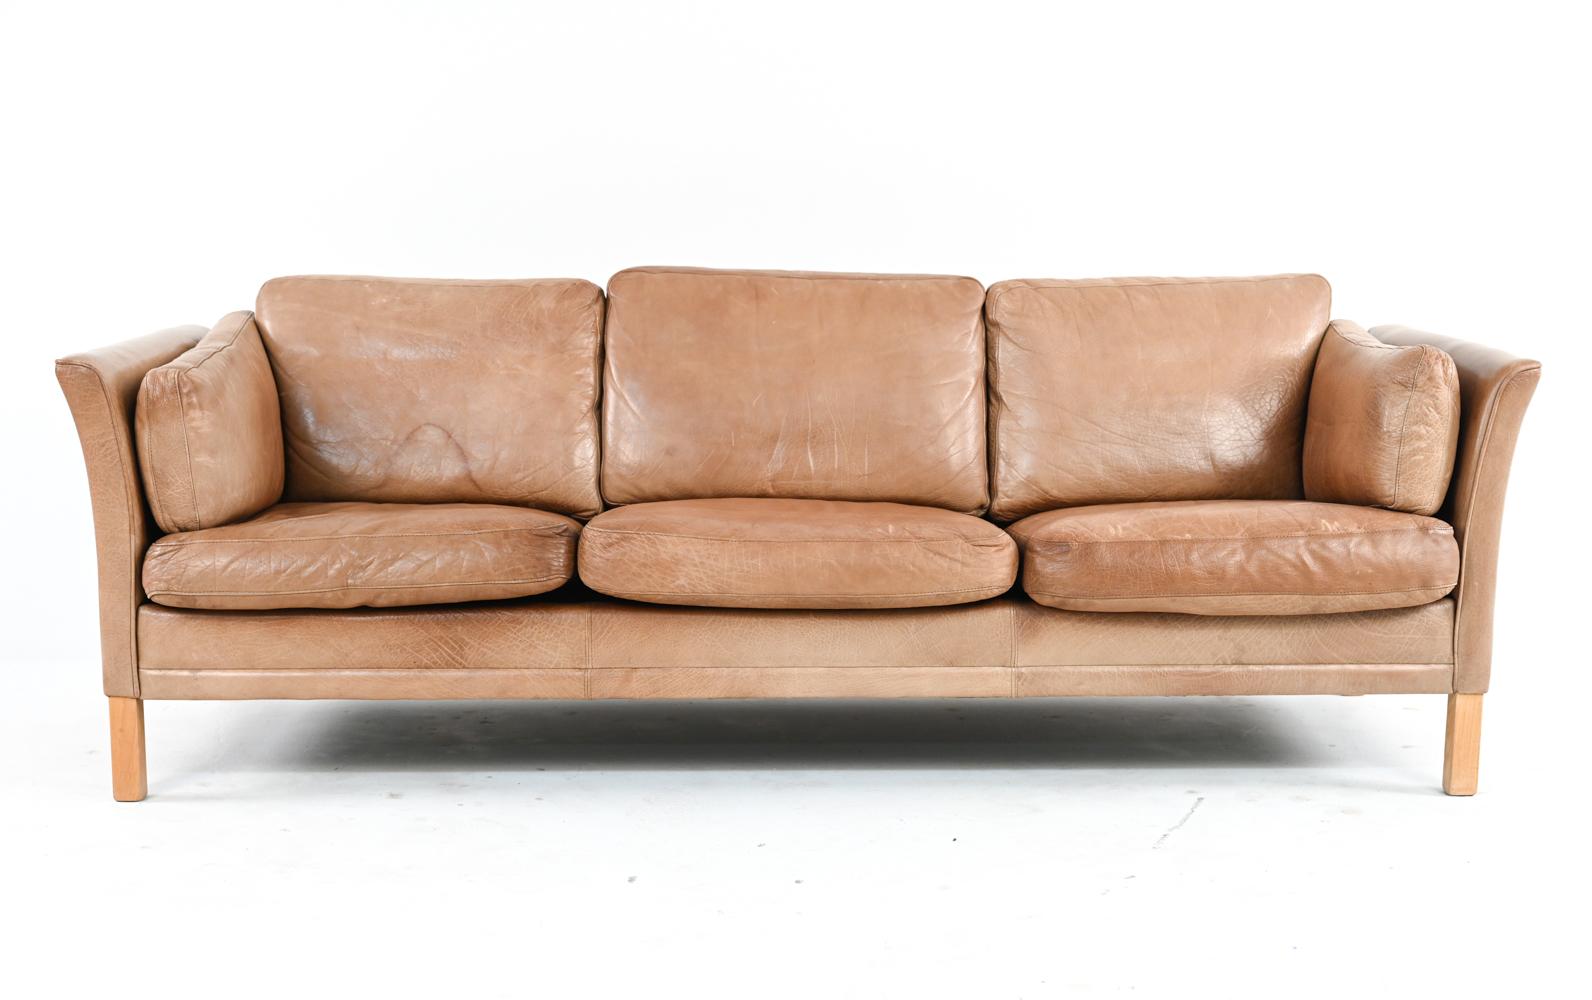 This classic three-seat sofa by Mogens Hansen is elevated by the addition of thick, luxurious buffalo leather upholstery, renowned for its durability and wide grain. In this example, the tan hide has produced a beautifully varied patina over time,